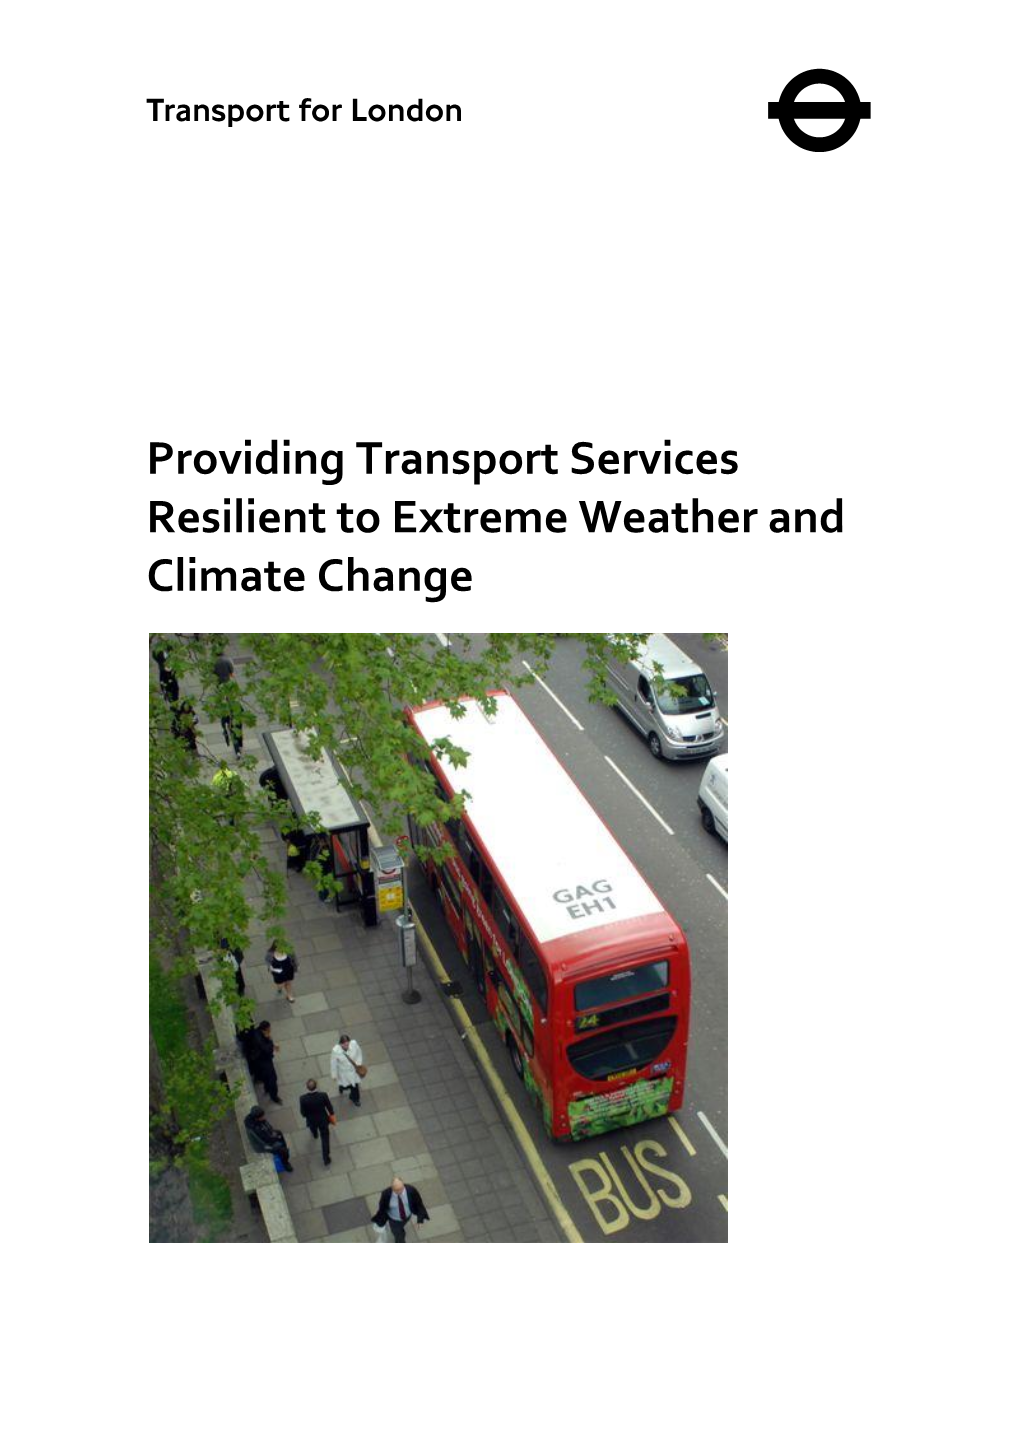 Providing Transport Services Resilient to Extreme Weather and Climate Change